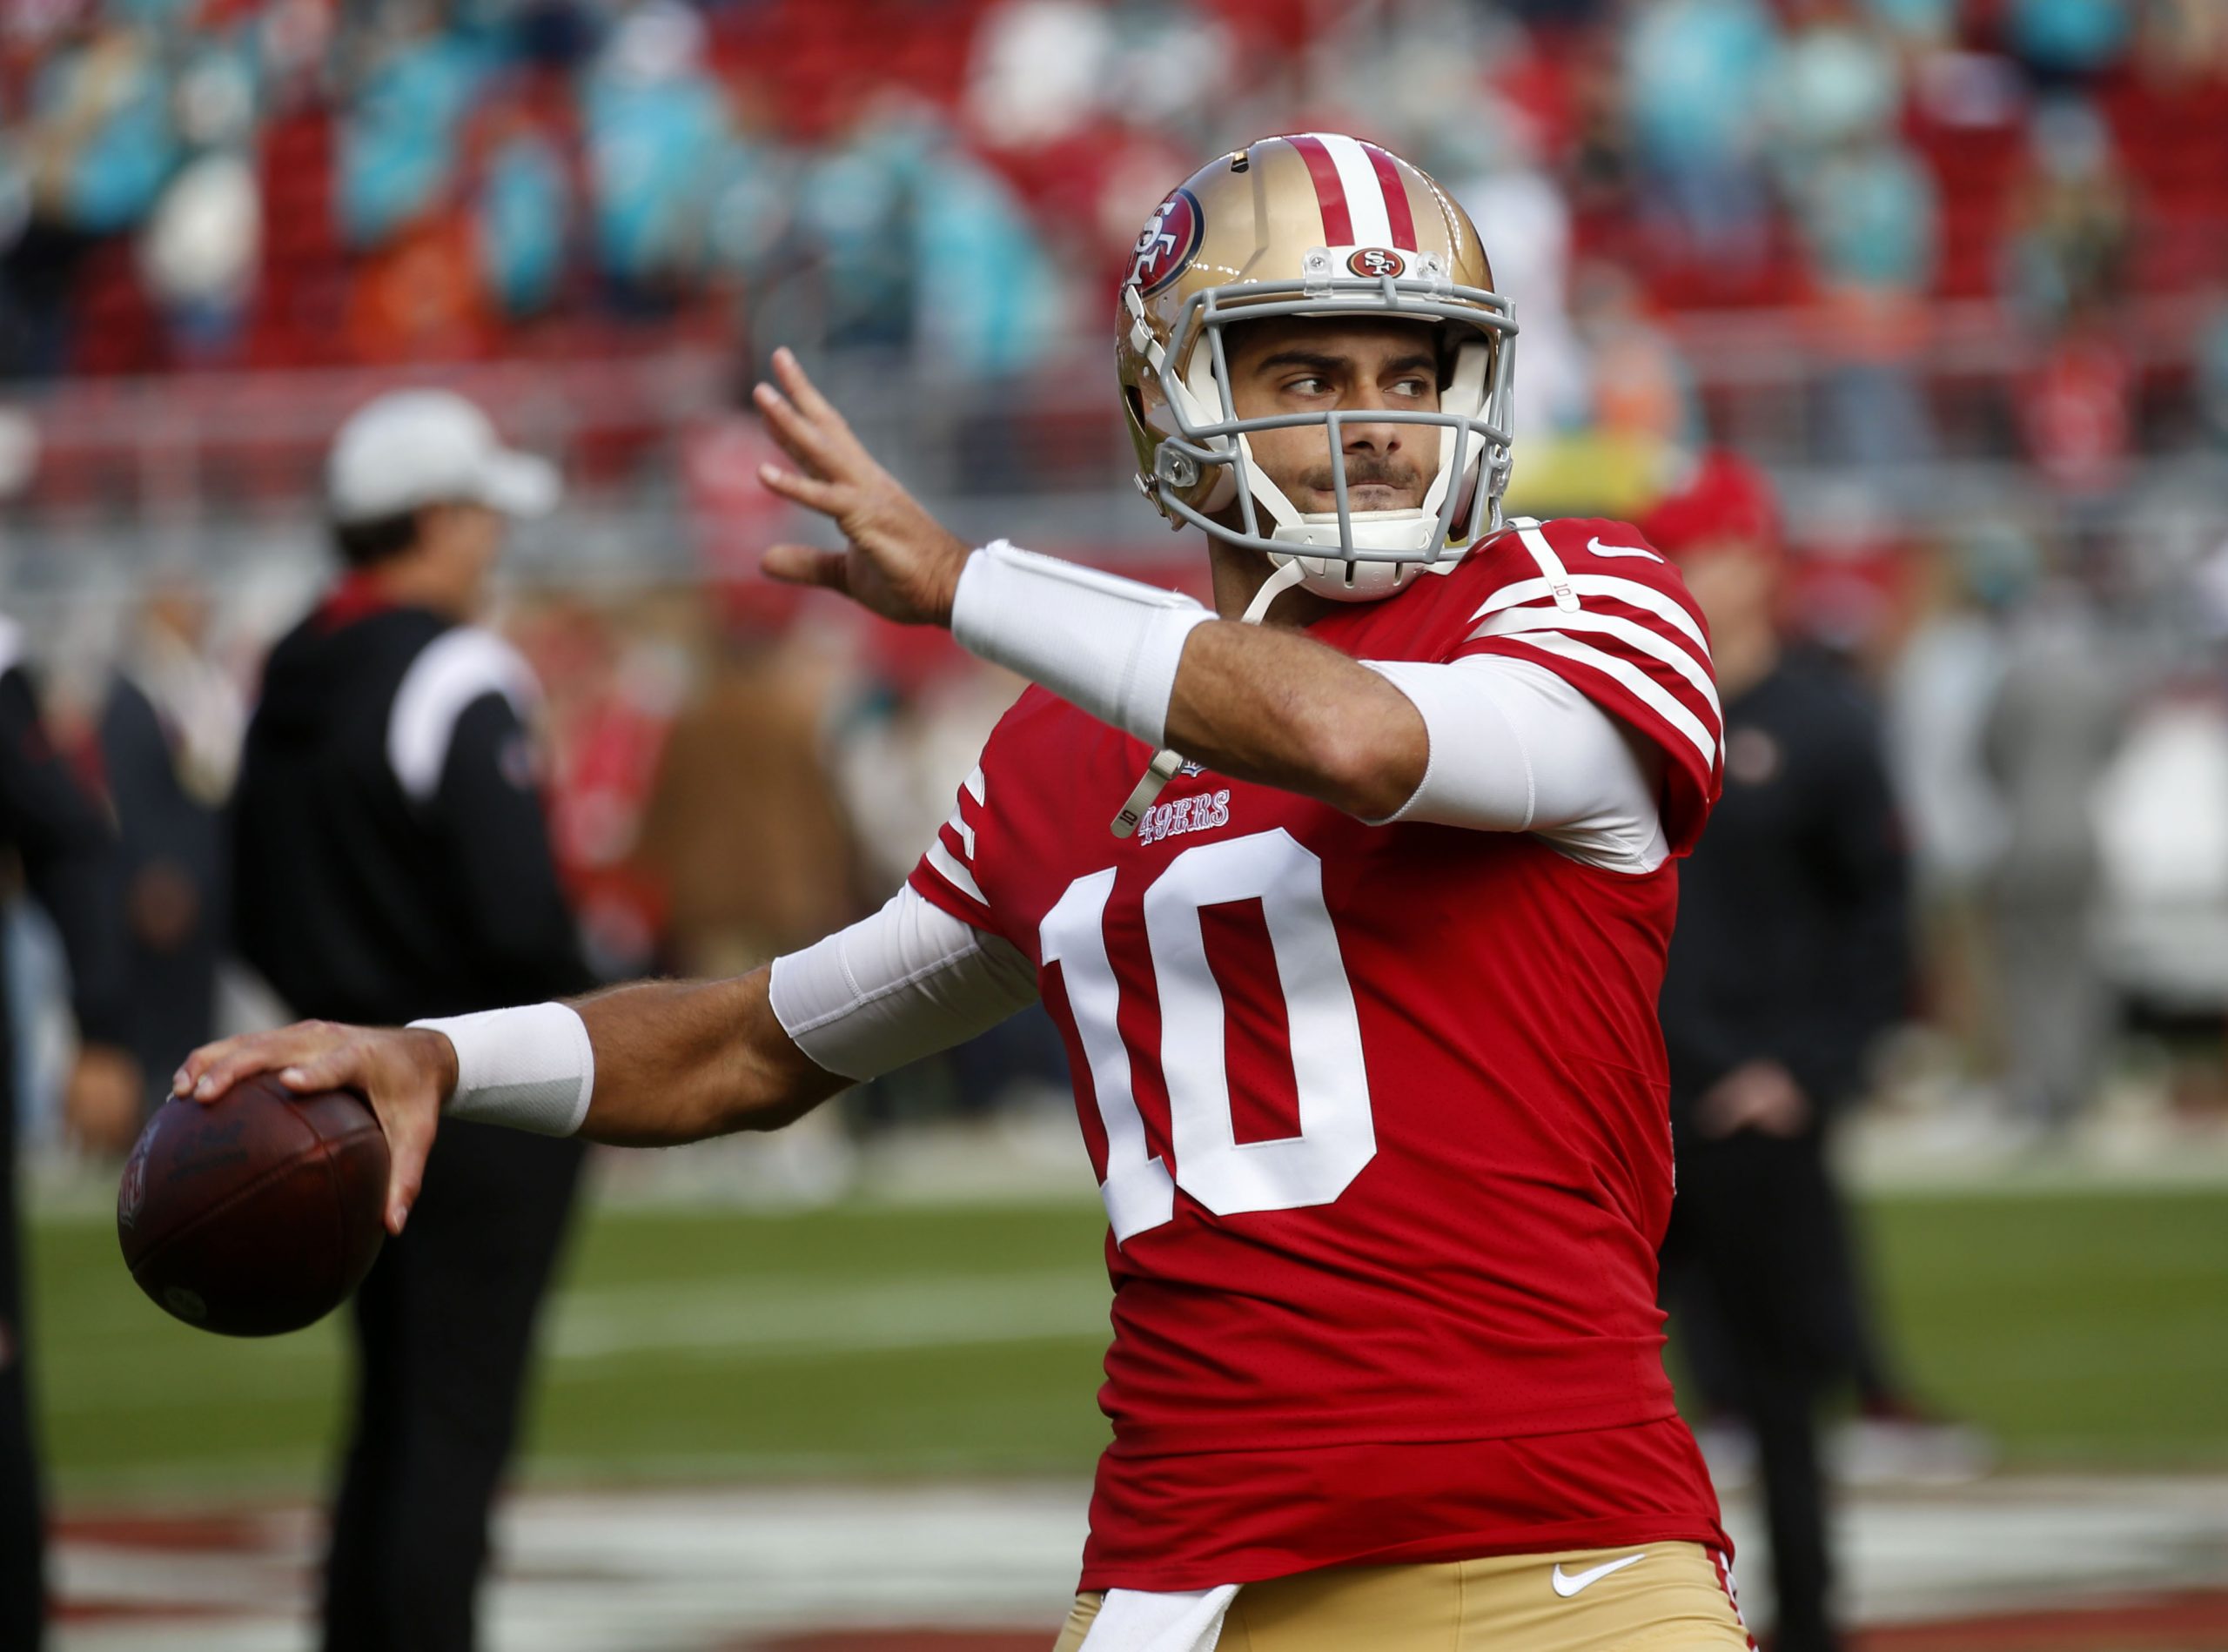 San Francisco 49ers quarterback Jimmy Garoppolo #10 warms up before their game against the Miami Do...